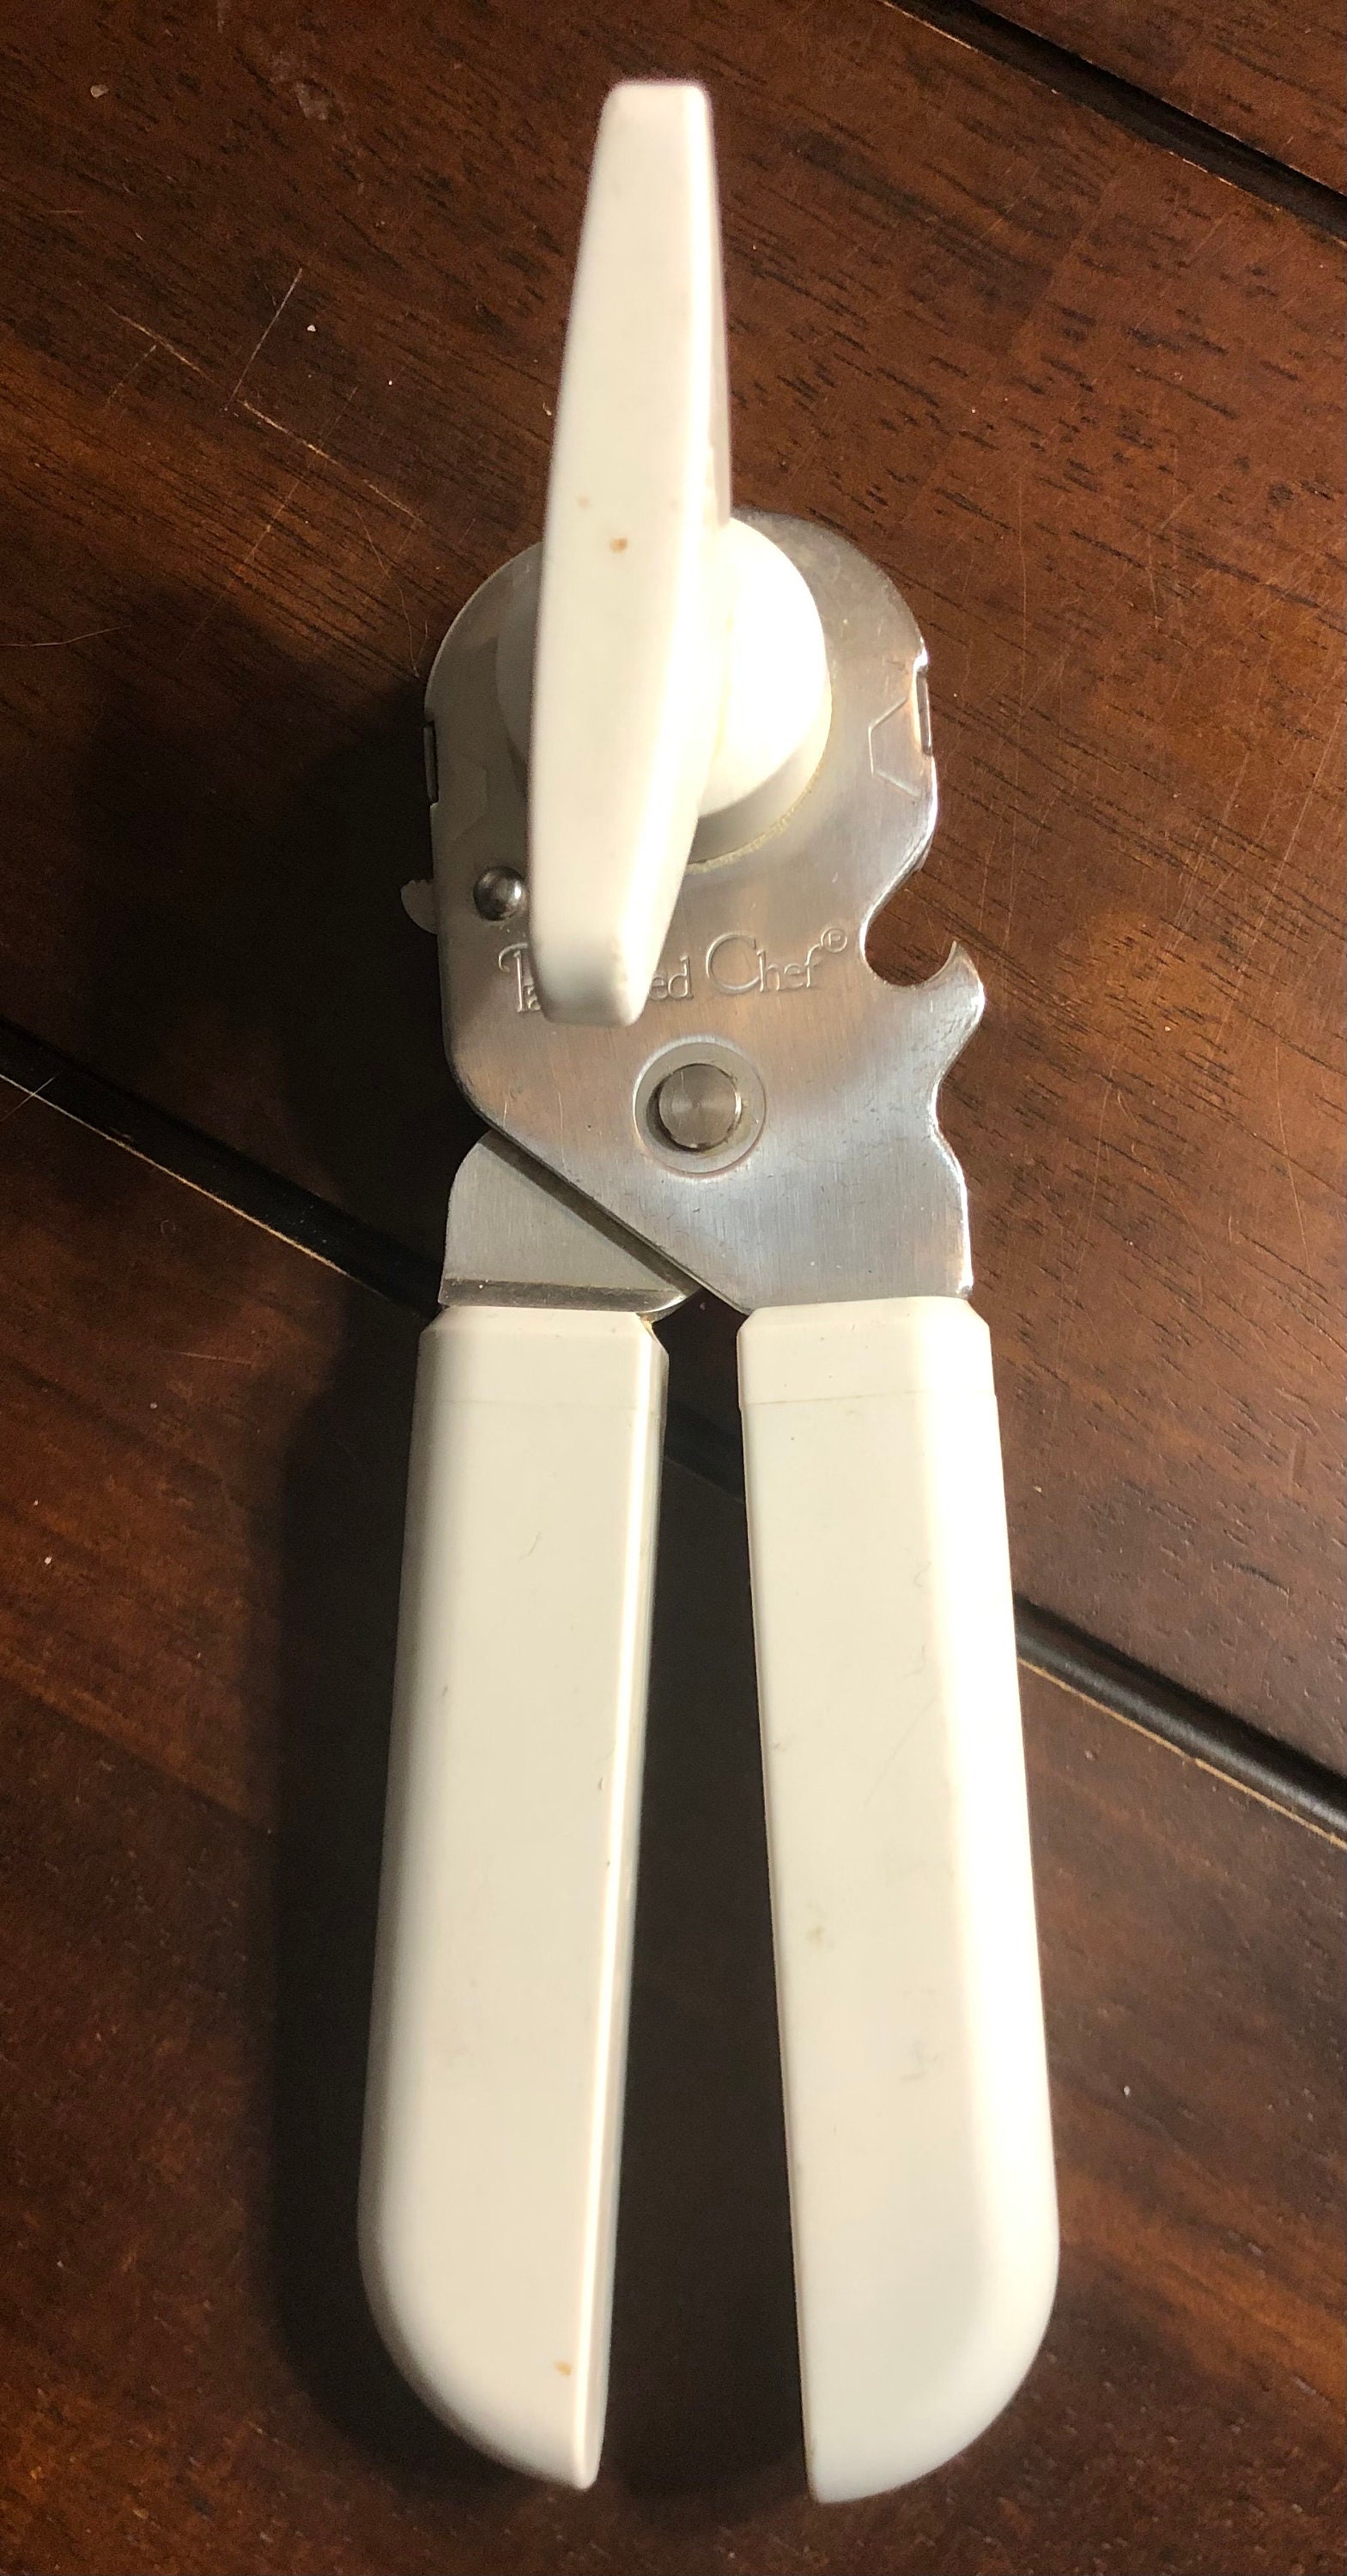 smooth-edge-can-opener - Pampered Chef Blog